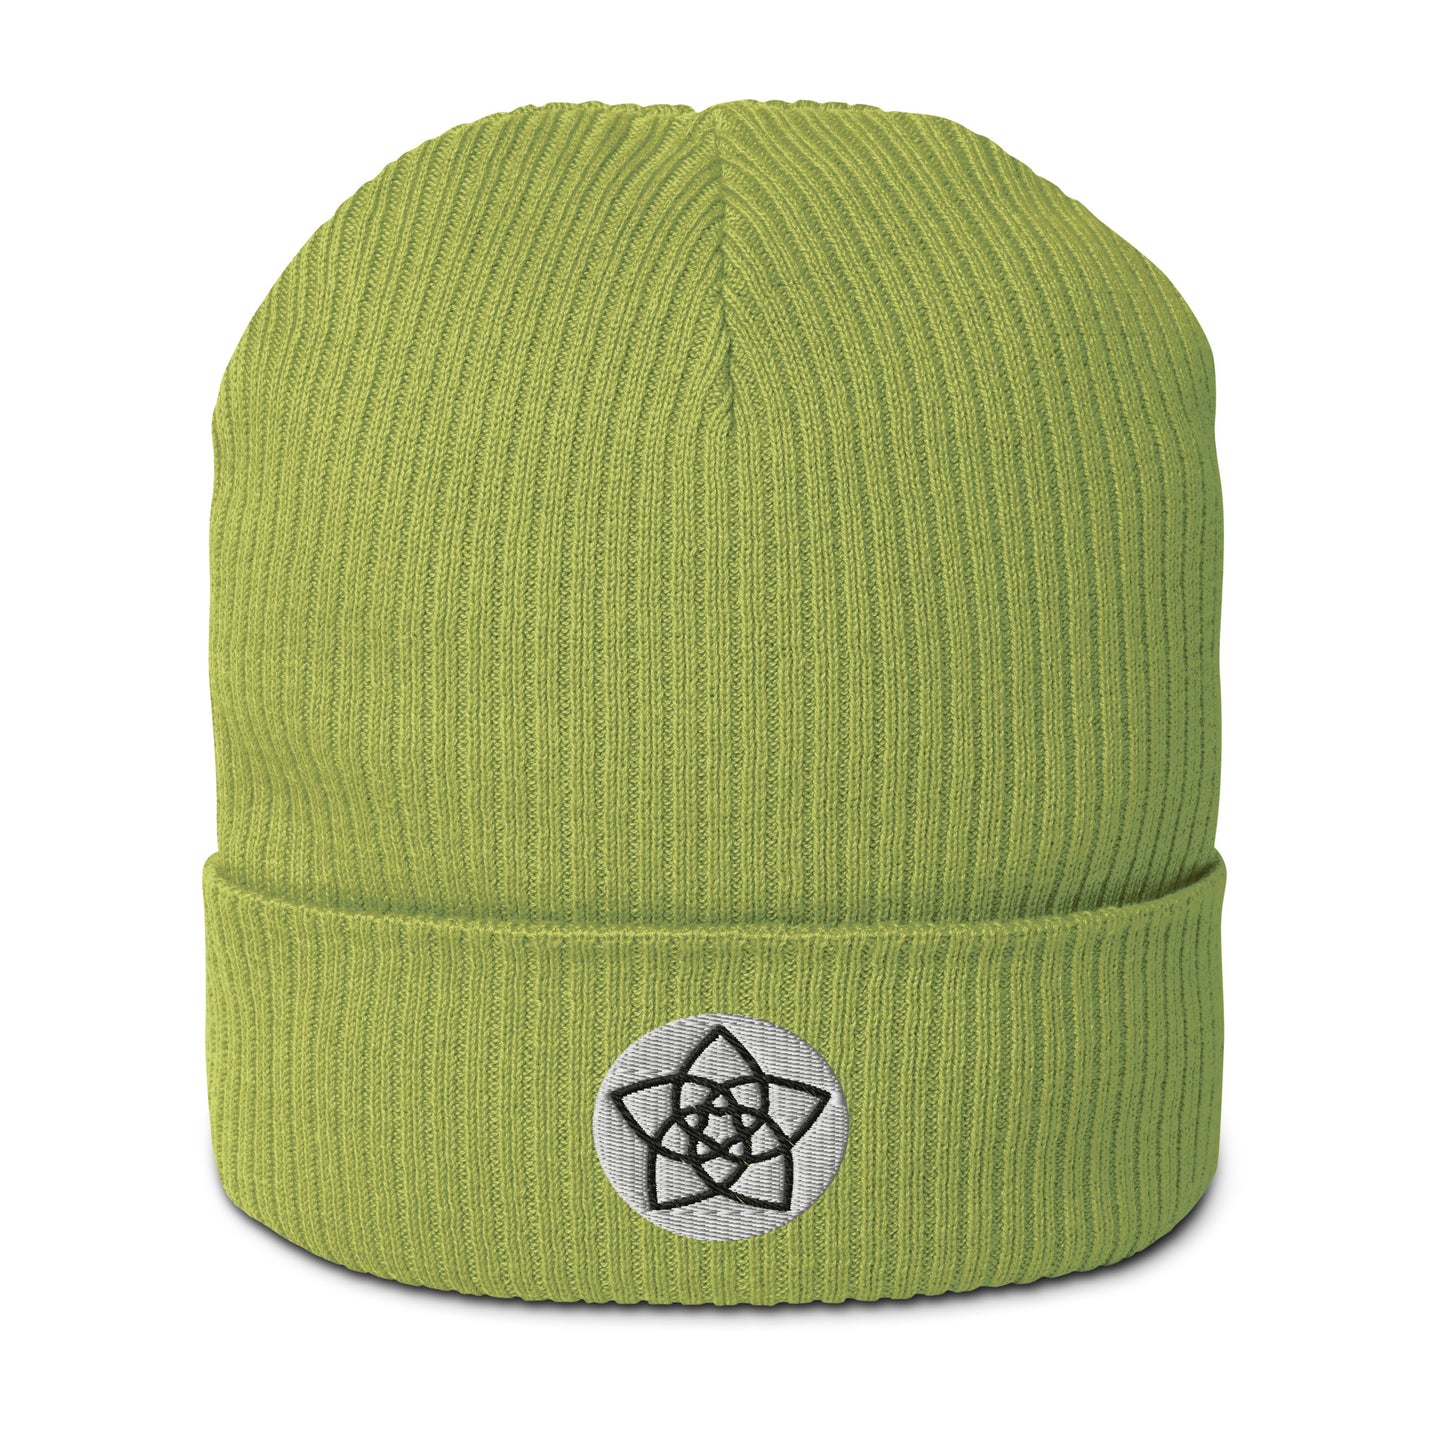 Tune into your inner goddess with our Venus Flower Organic Cotton Beanie in Apple Green. Crafted from organic cotton and embroidered with the Venus Flower symbol, this beanie is a tribute to the divine feminine, blooming with unity, balance, and celestial connections. Plus, it's made with breathable, lightweight fabric and natural materials, ensuring you feel as light as a petal while you're on your celestial journey. Snatch one of these beanies and infuse your style with a touch of Venusian magic.